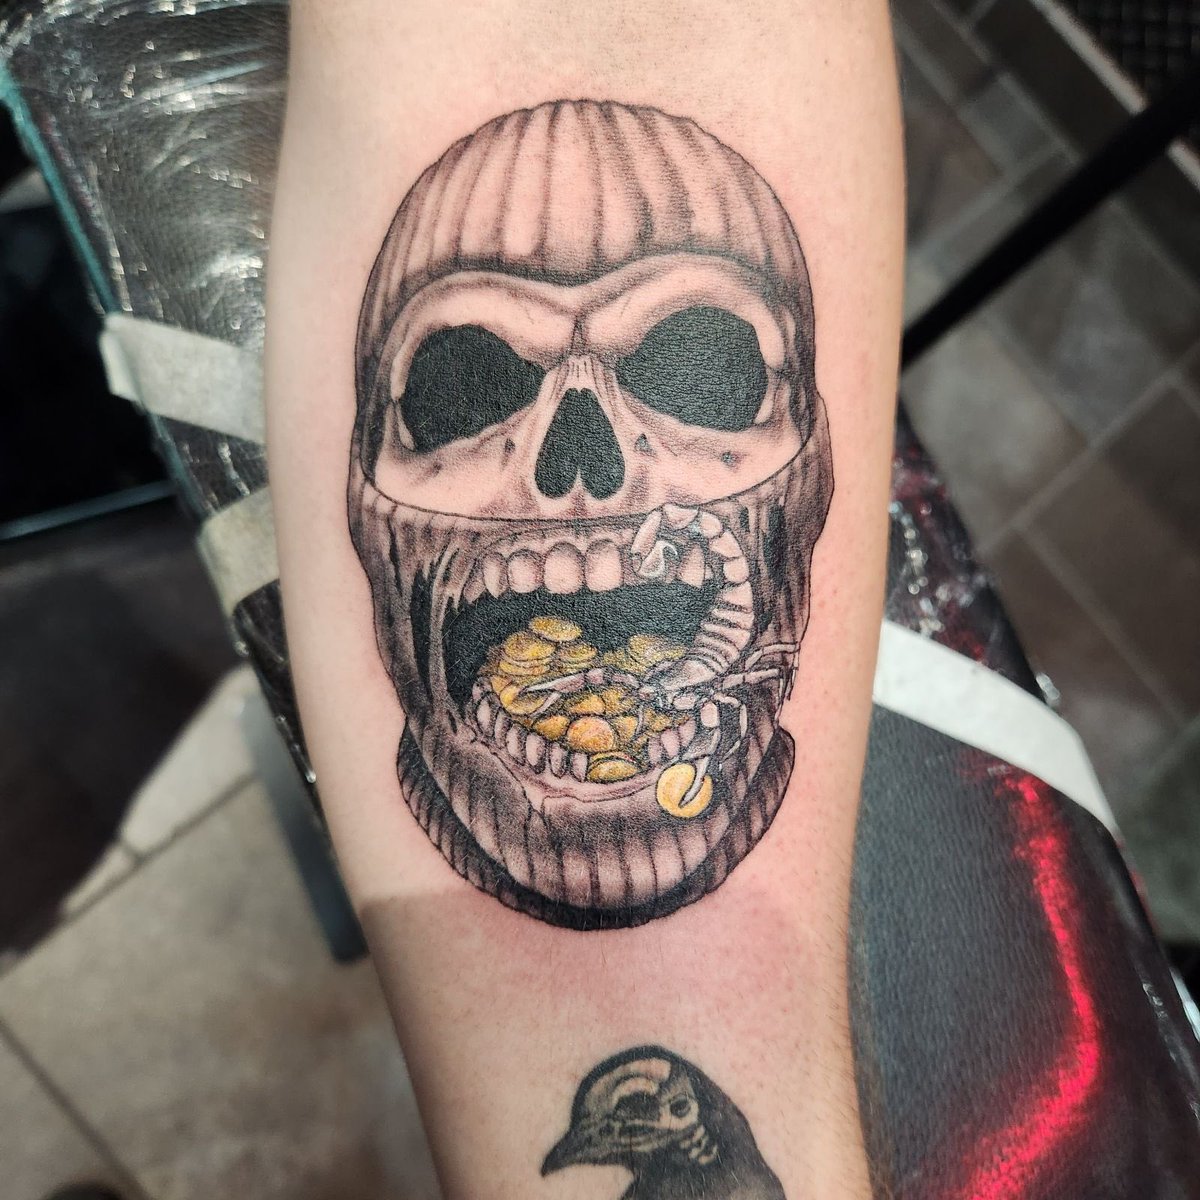 Custom skull tattoo today by @lunabestabbin 💀 We have availability throughout the rest of the year! Email us to book. countstattoo@gmail.com @DannyCountKoker @CountsKustoms #countstattoo #countskustoms #lasvegastattooartist #lasvegastattooshop #skulltattoo